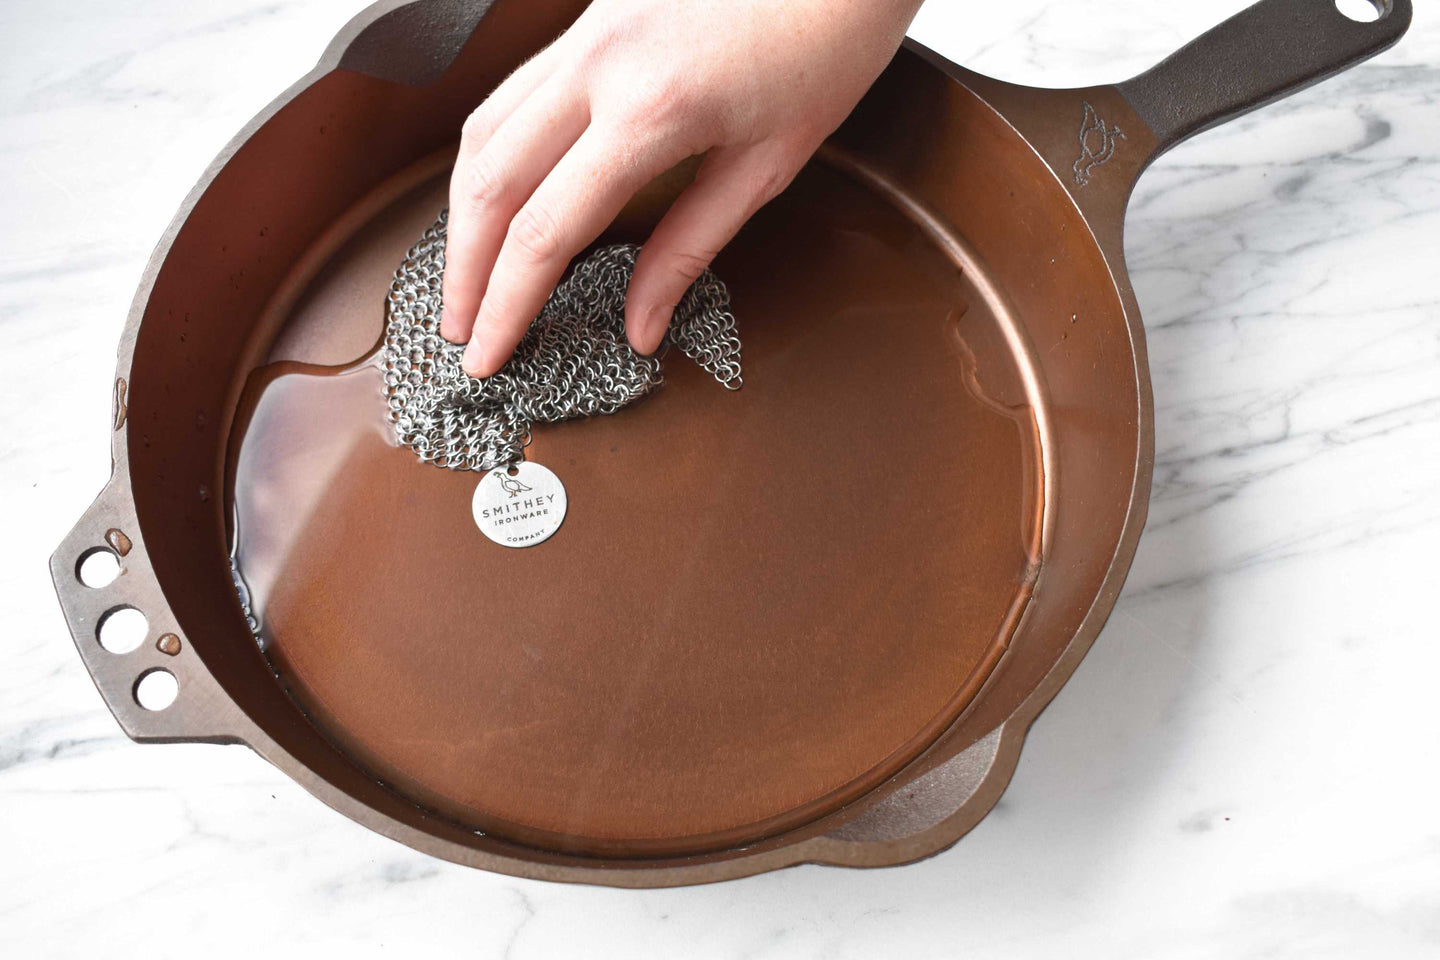 cleaning a cast iron skillet